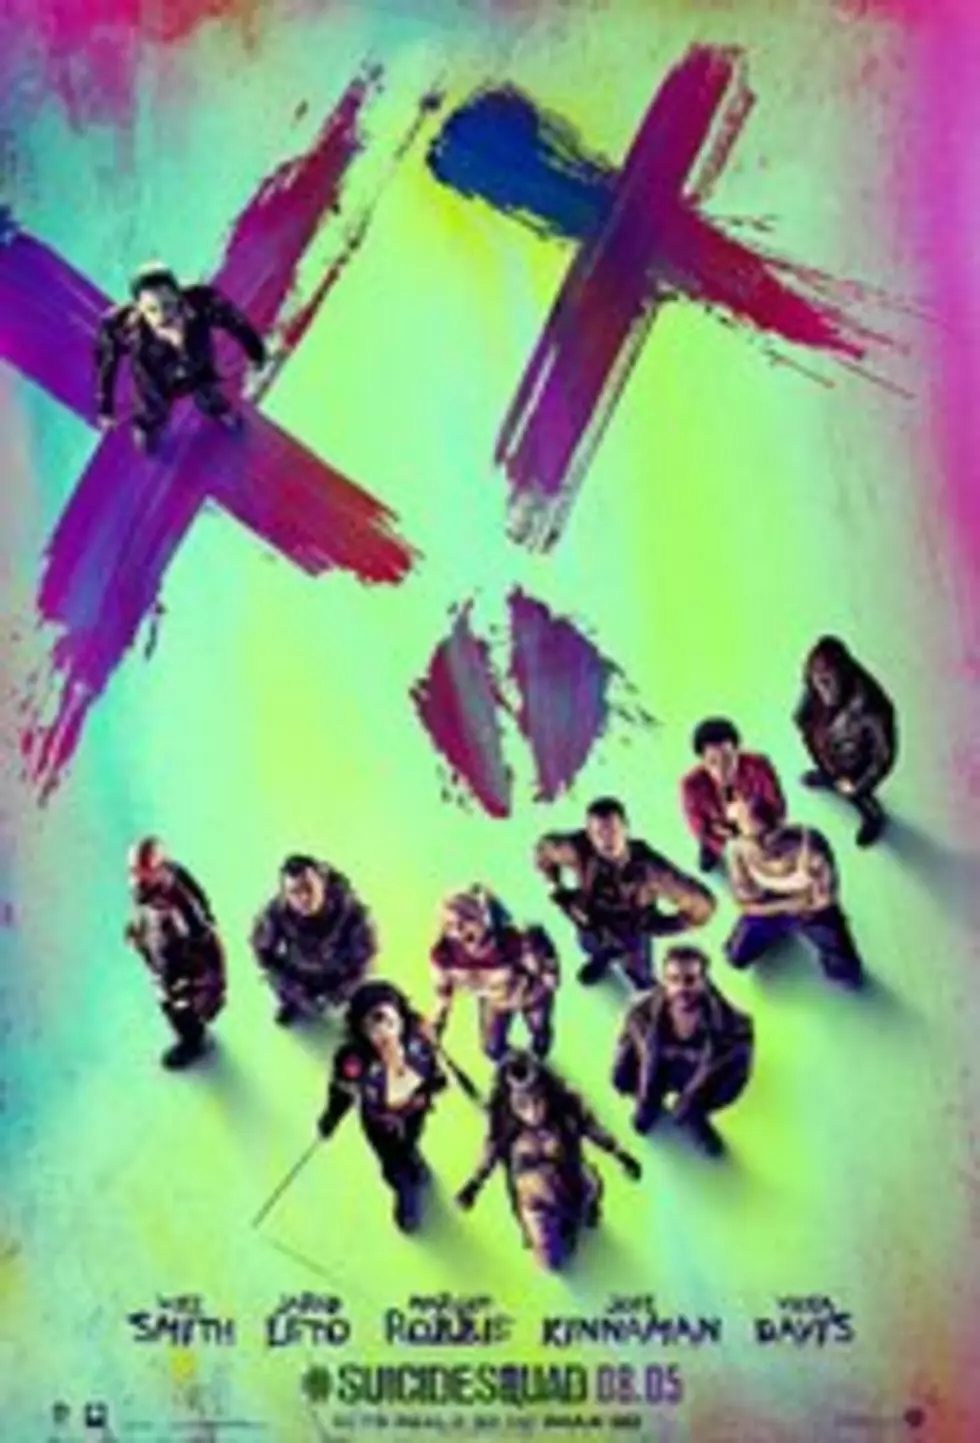 NEW Suicide Squad Trailer Is Out